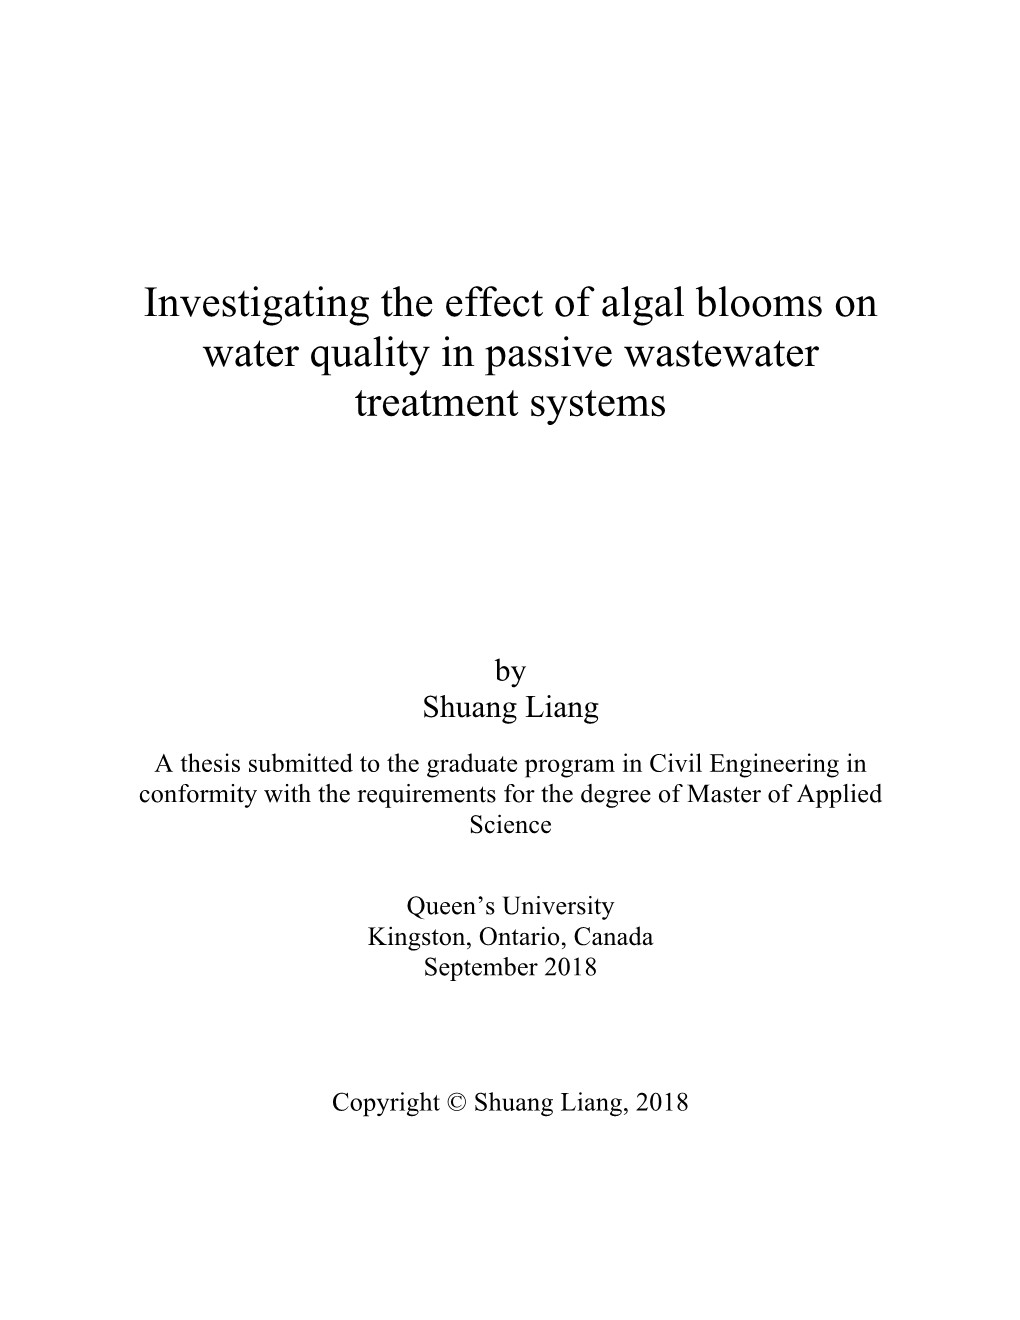 Investigating the Effect of Algal Blooms on Water Quality in Passive Wastewater Treatment Systems